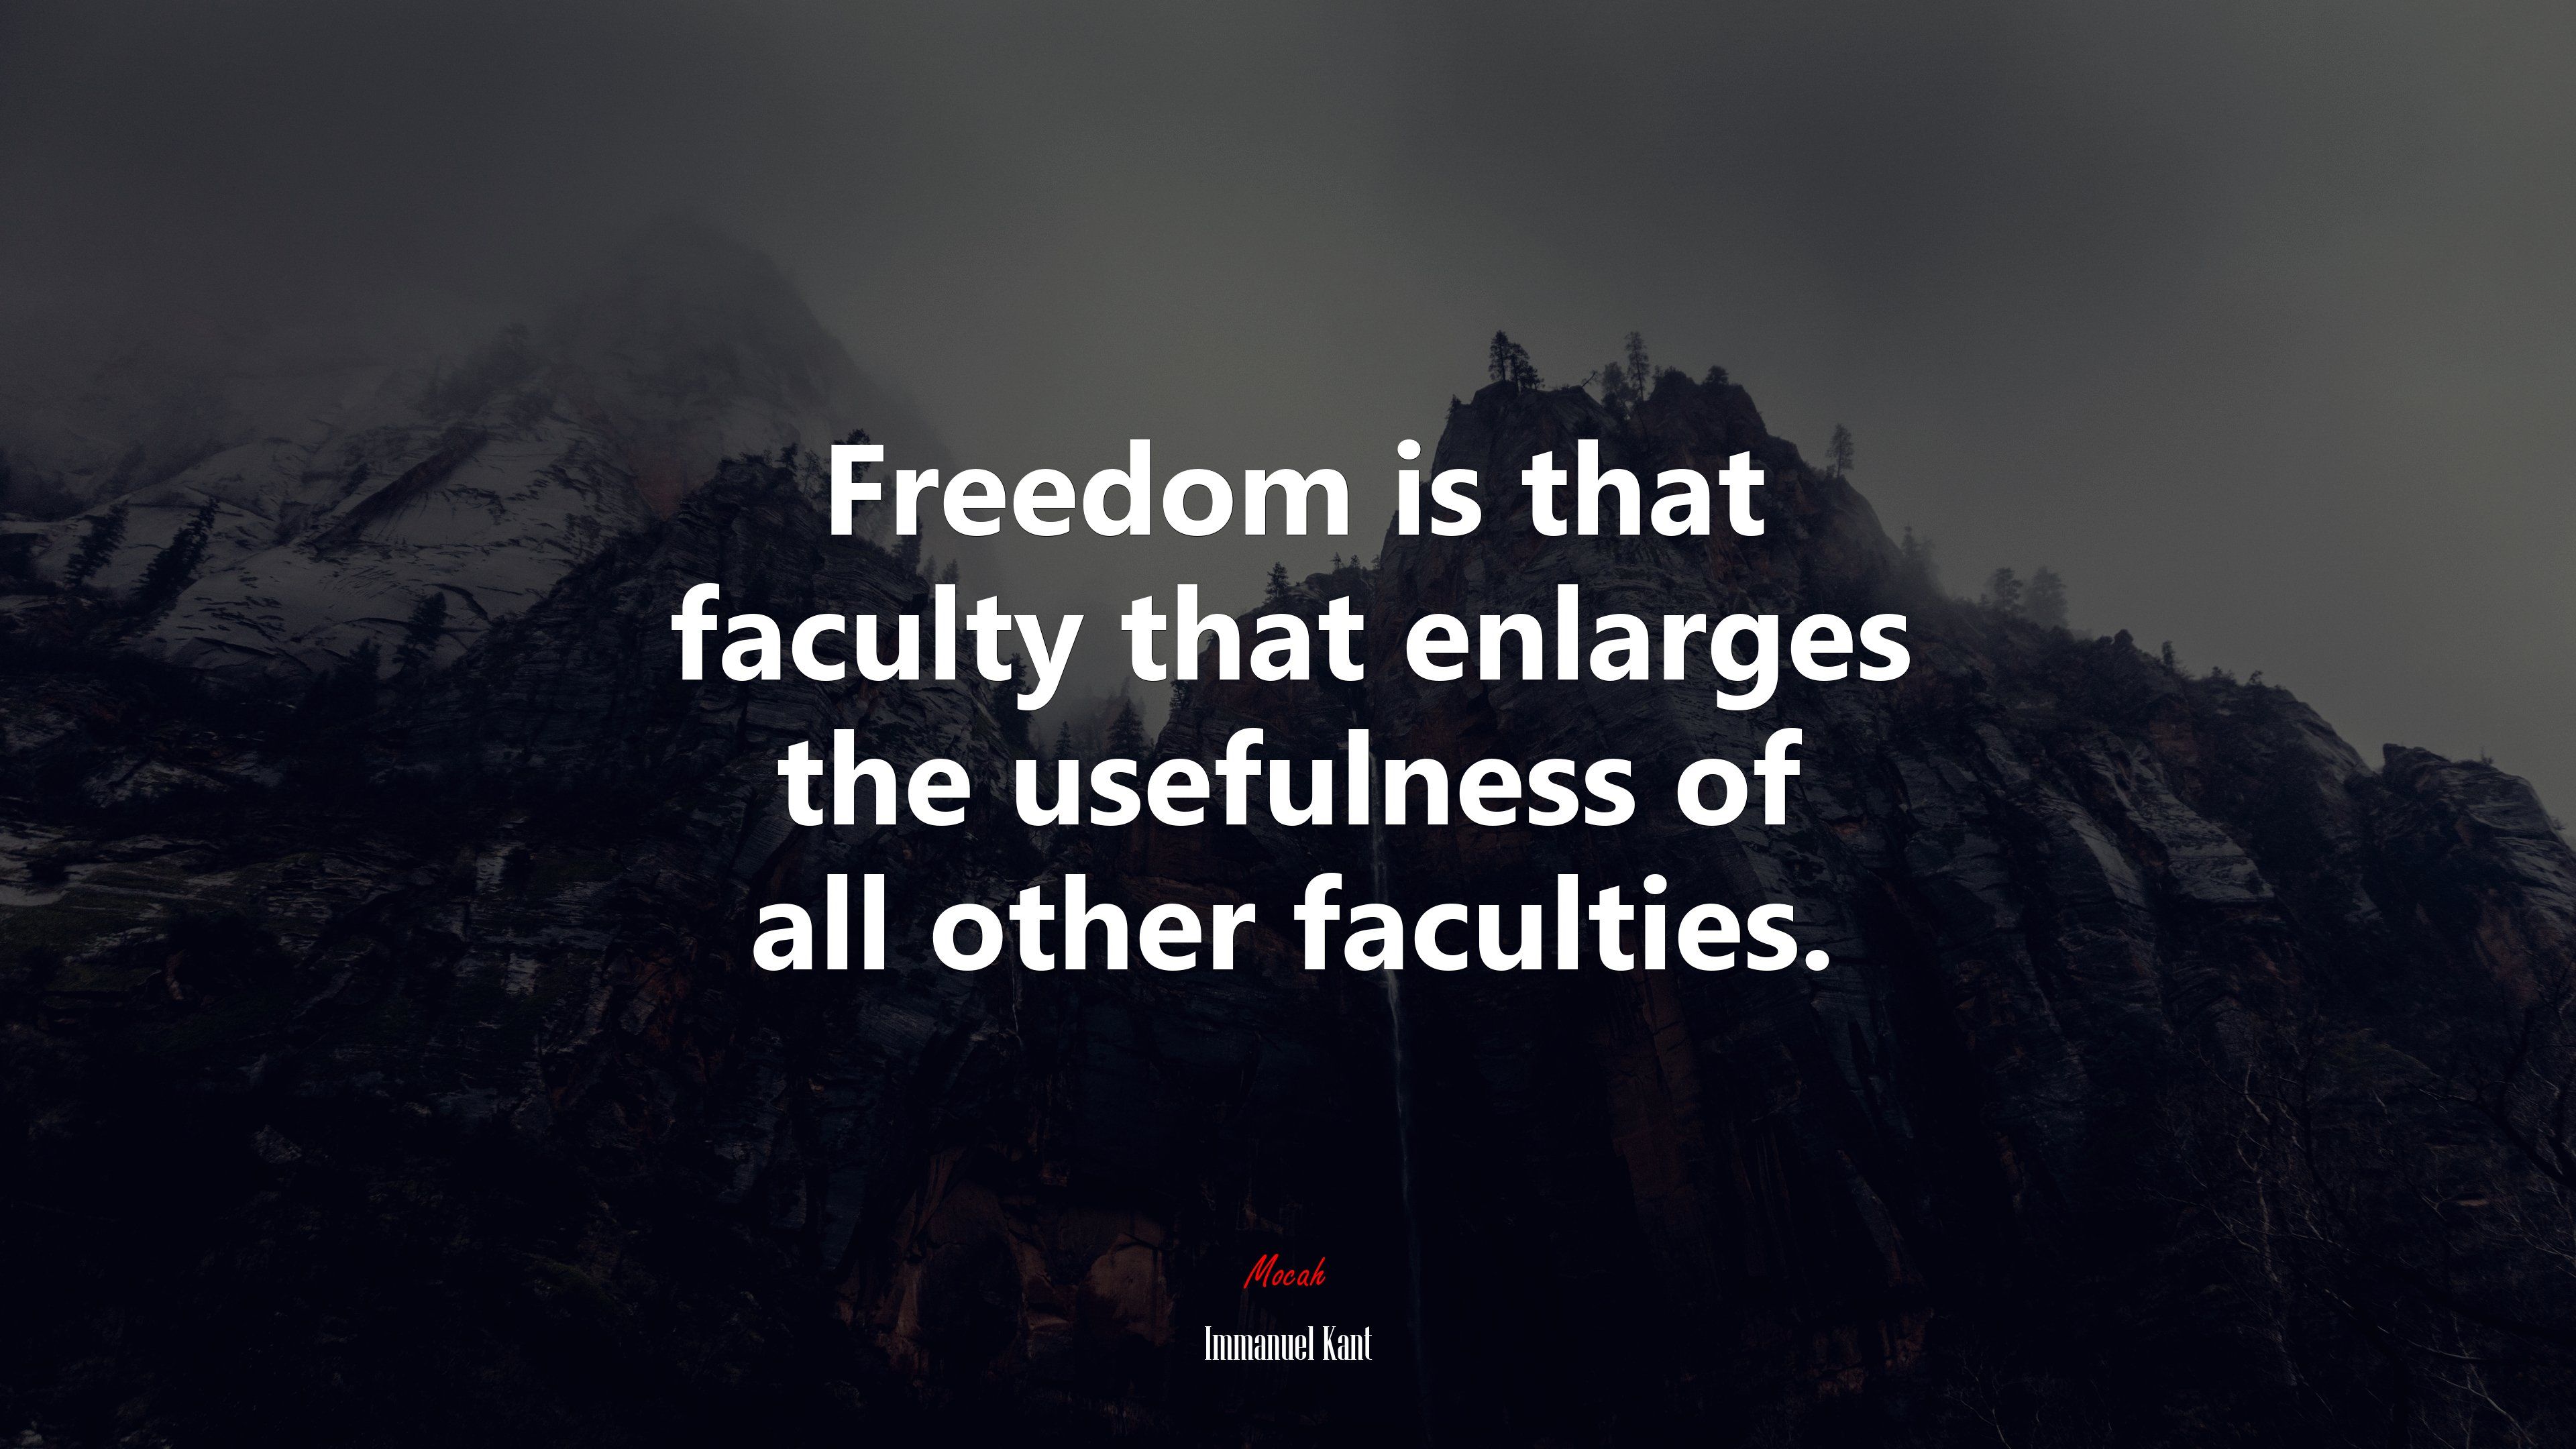 Freedom is that faculty that enlarges the usefulness of all other faculties. Immanuel Kant quote, 4k wallpaper. Mocah.org HD Desktop Wallpaper